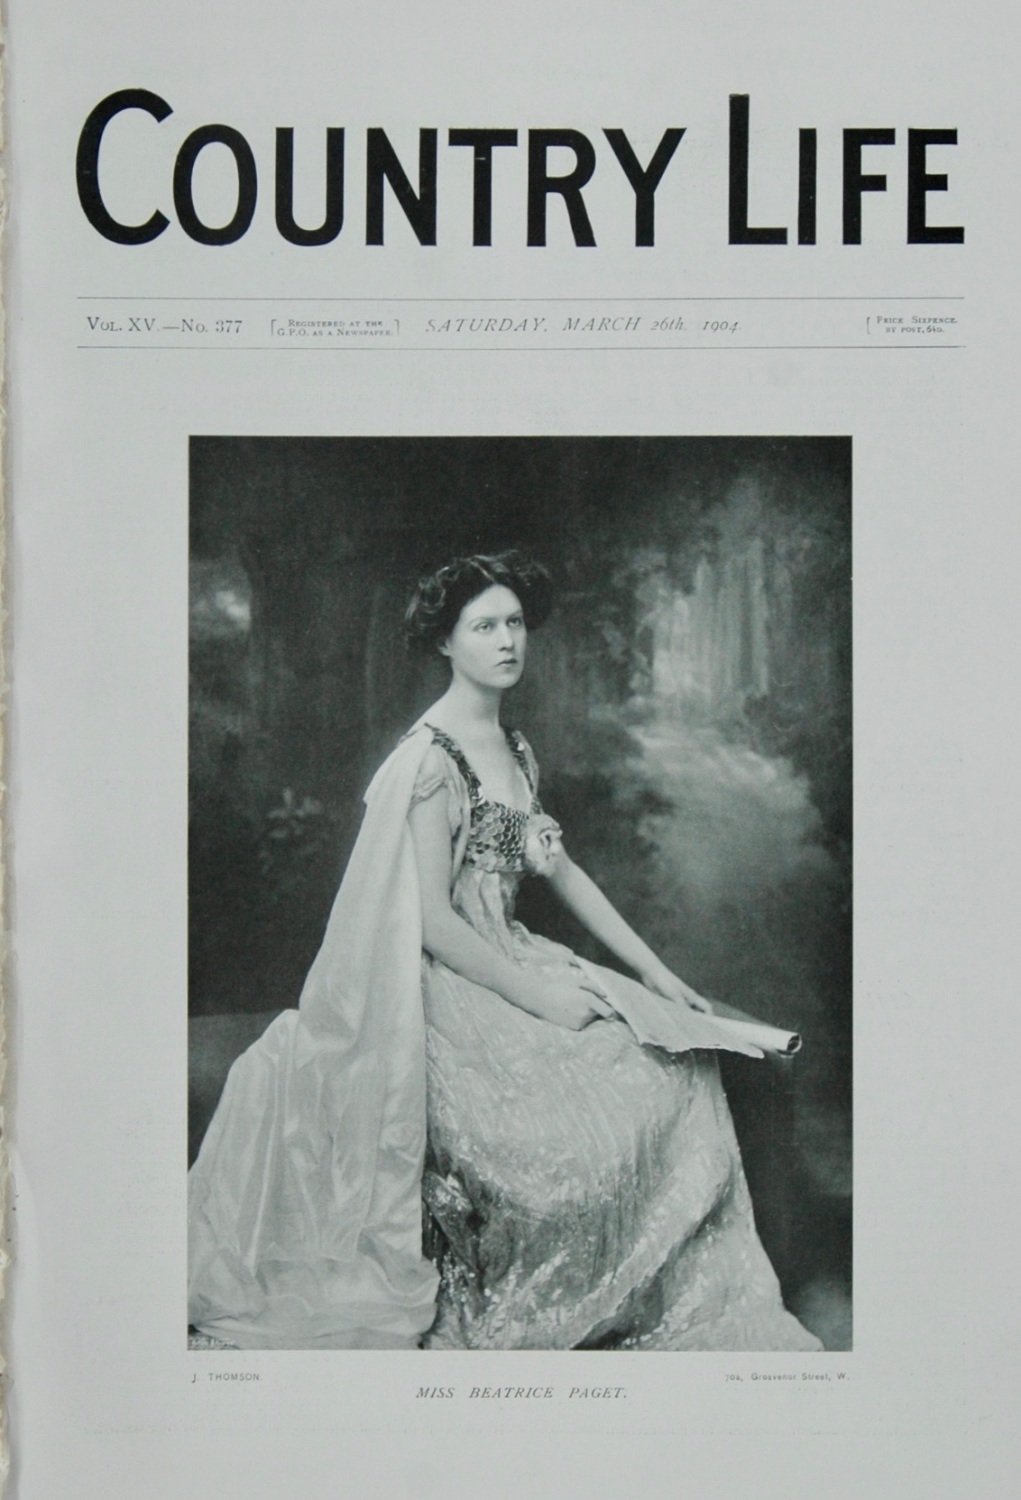 Country Life - March 26, 1904